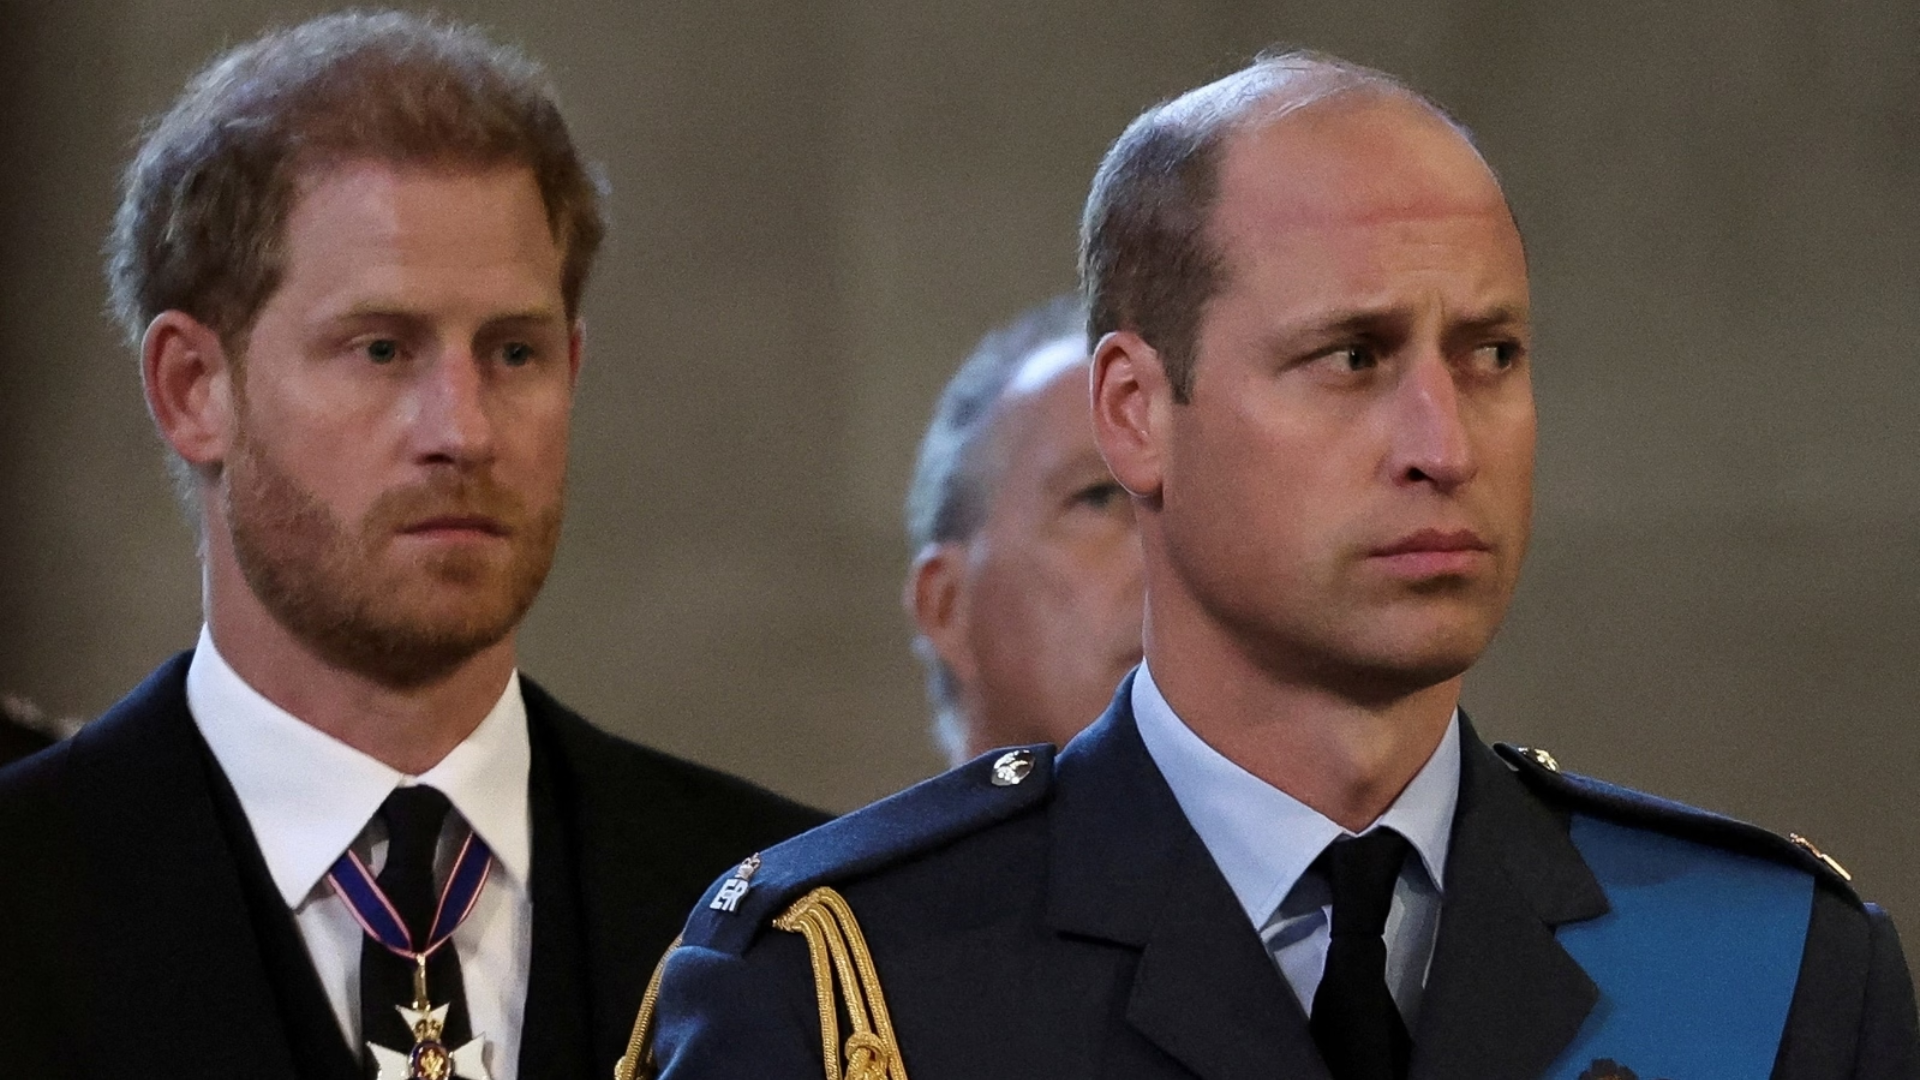 Is Prince William ‘Jealous’ of Prince Harry’s ‘Freedom’?